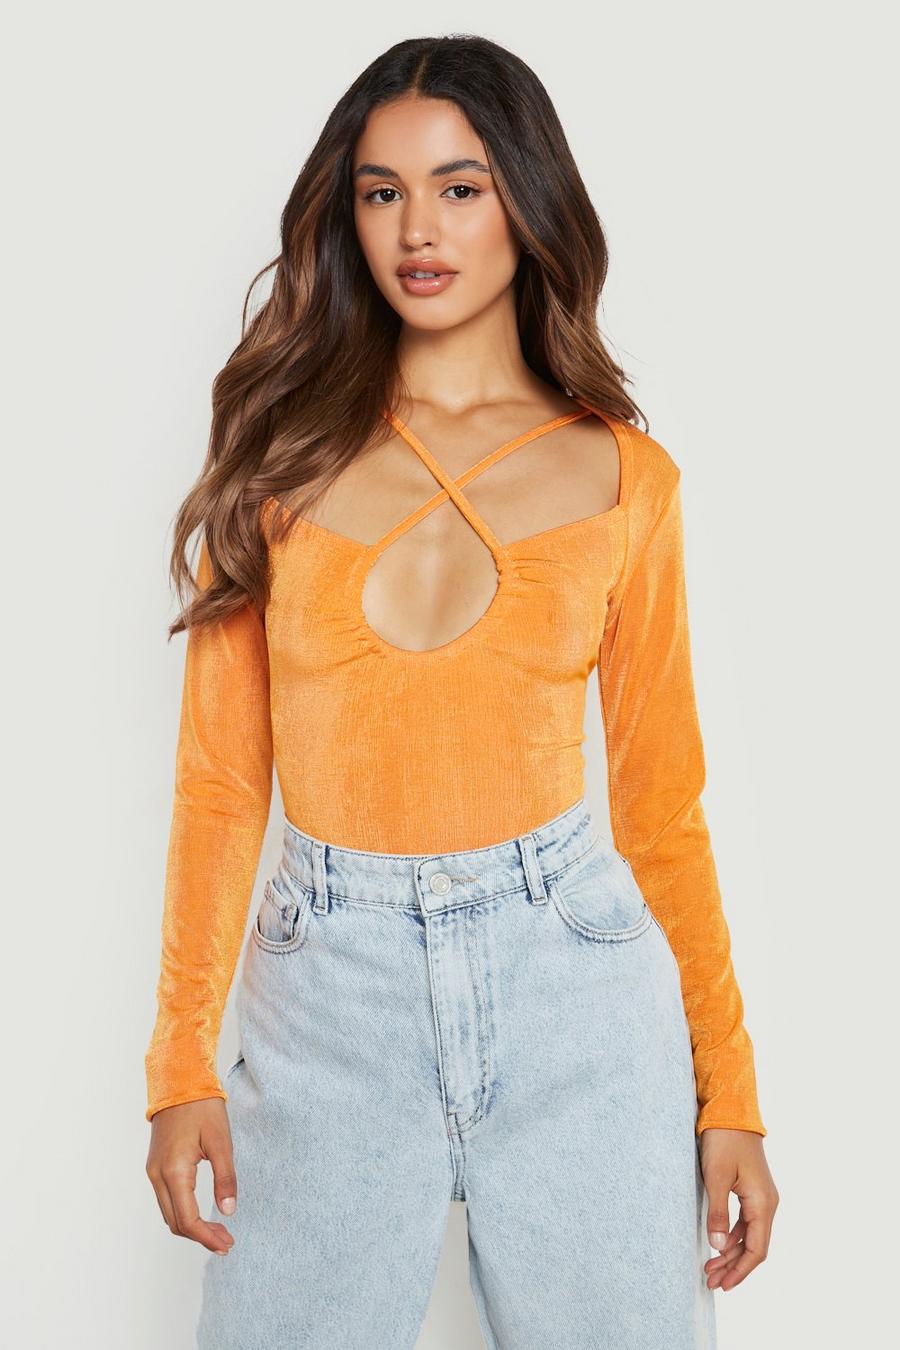 Cut-Out Body, Tangerine